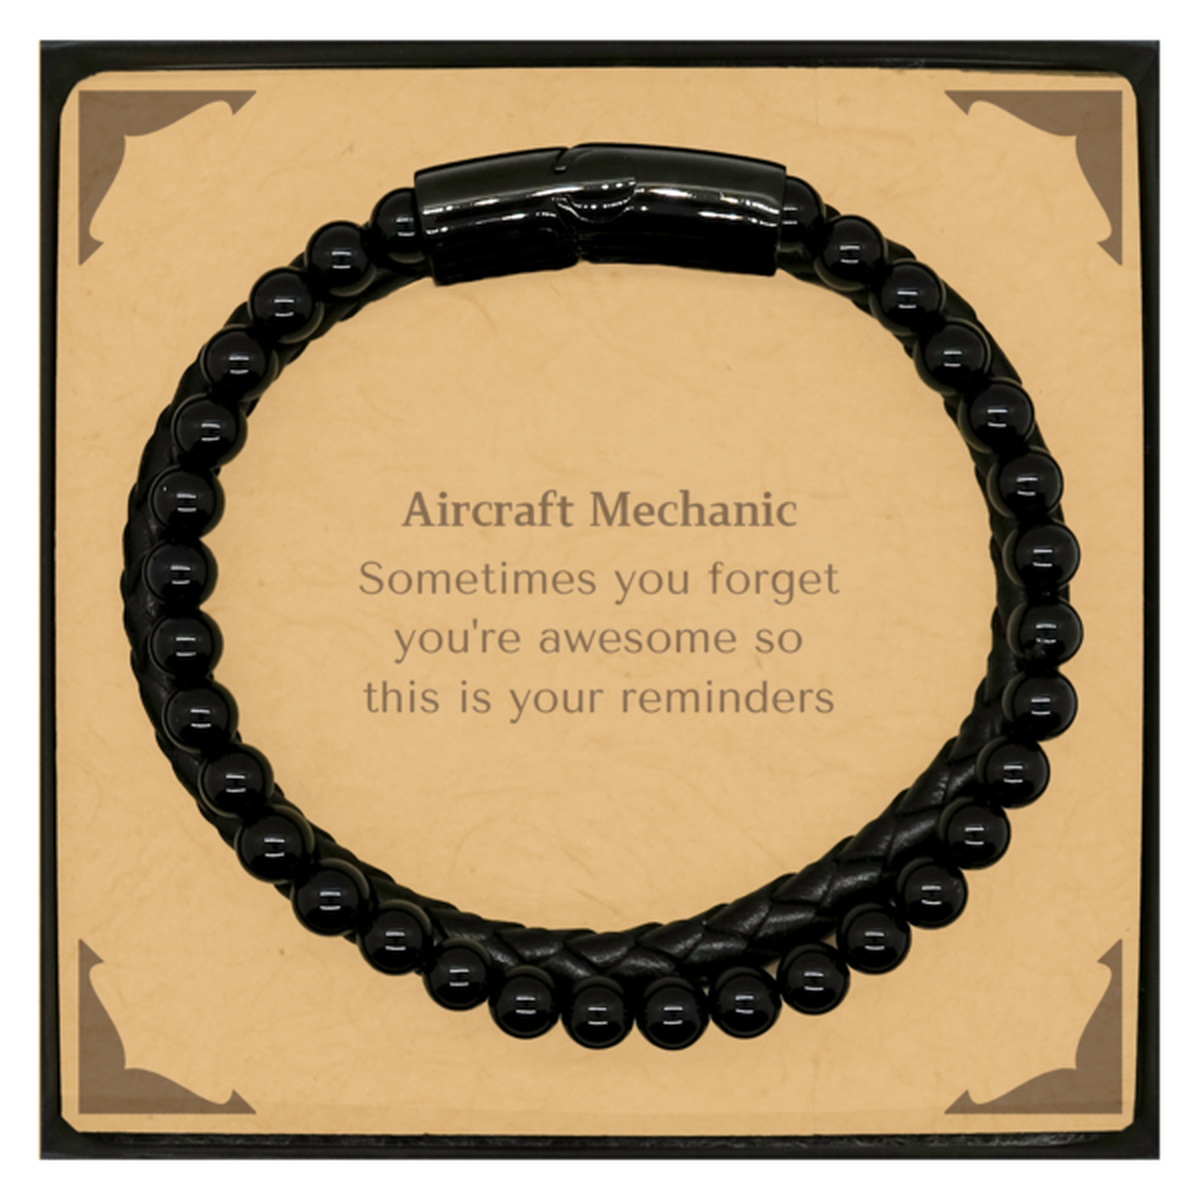 Sentimental Aircraft Mechanic Stone Leather Bracelets, Aircraft Mechanic Sometimes you forget you're awesome so this is your reminders, Graduation Christmas Birthday Gifts for Aircraft Mechanic, Men, Women, Coworkers